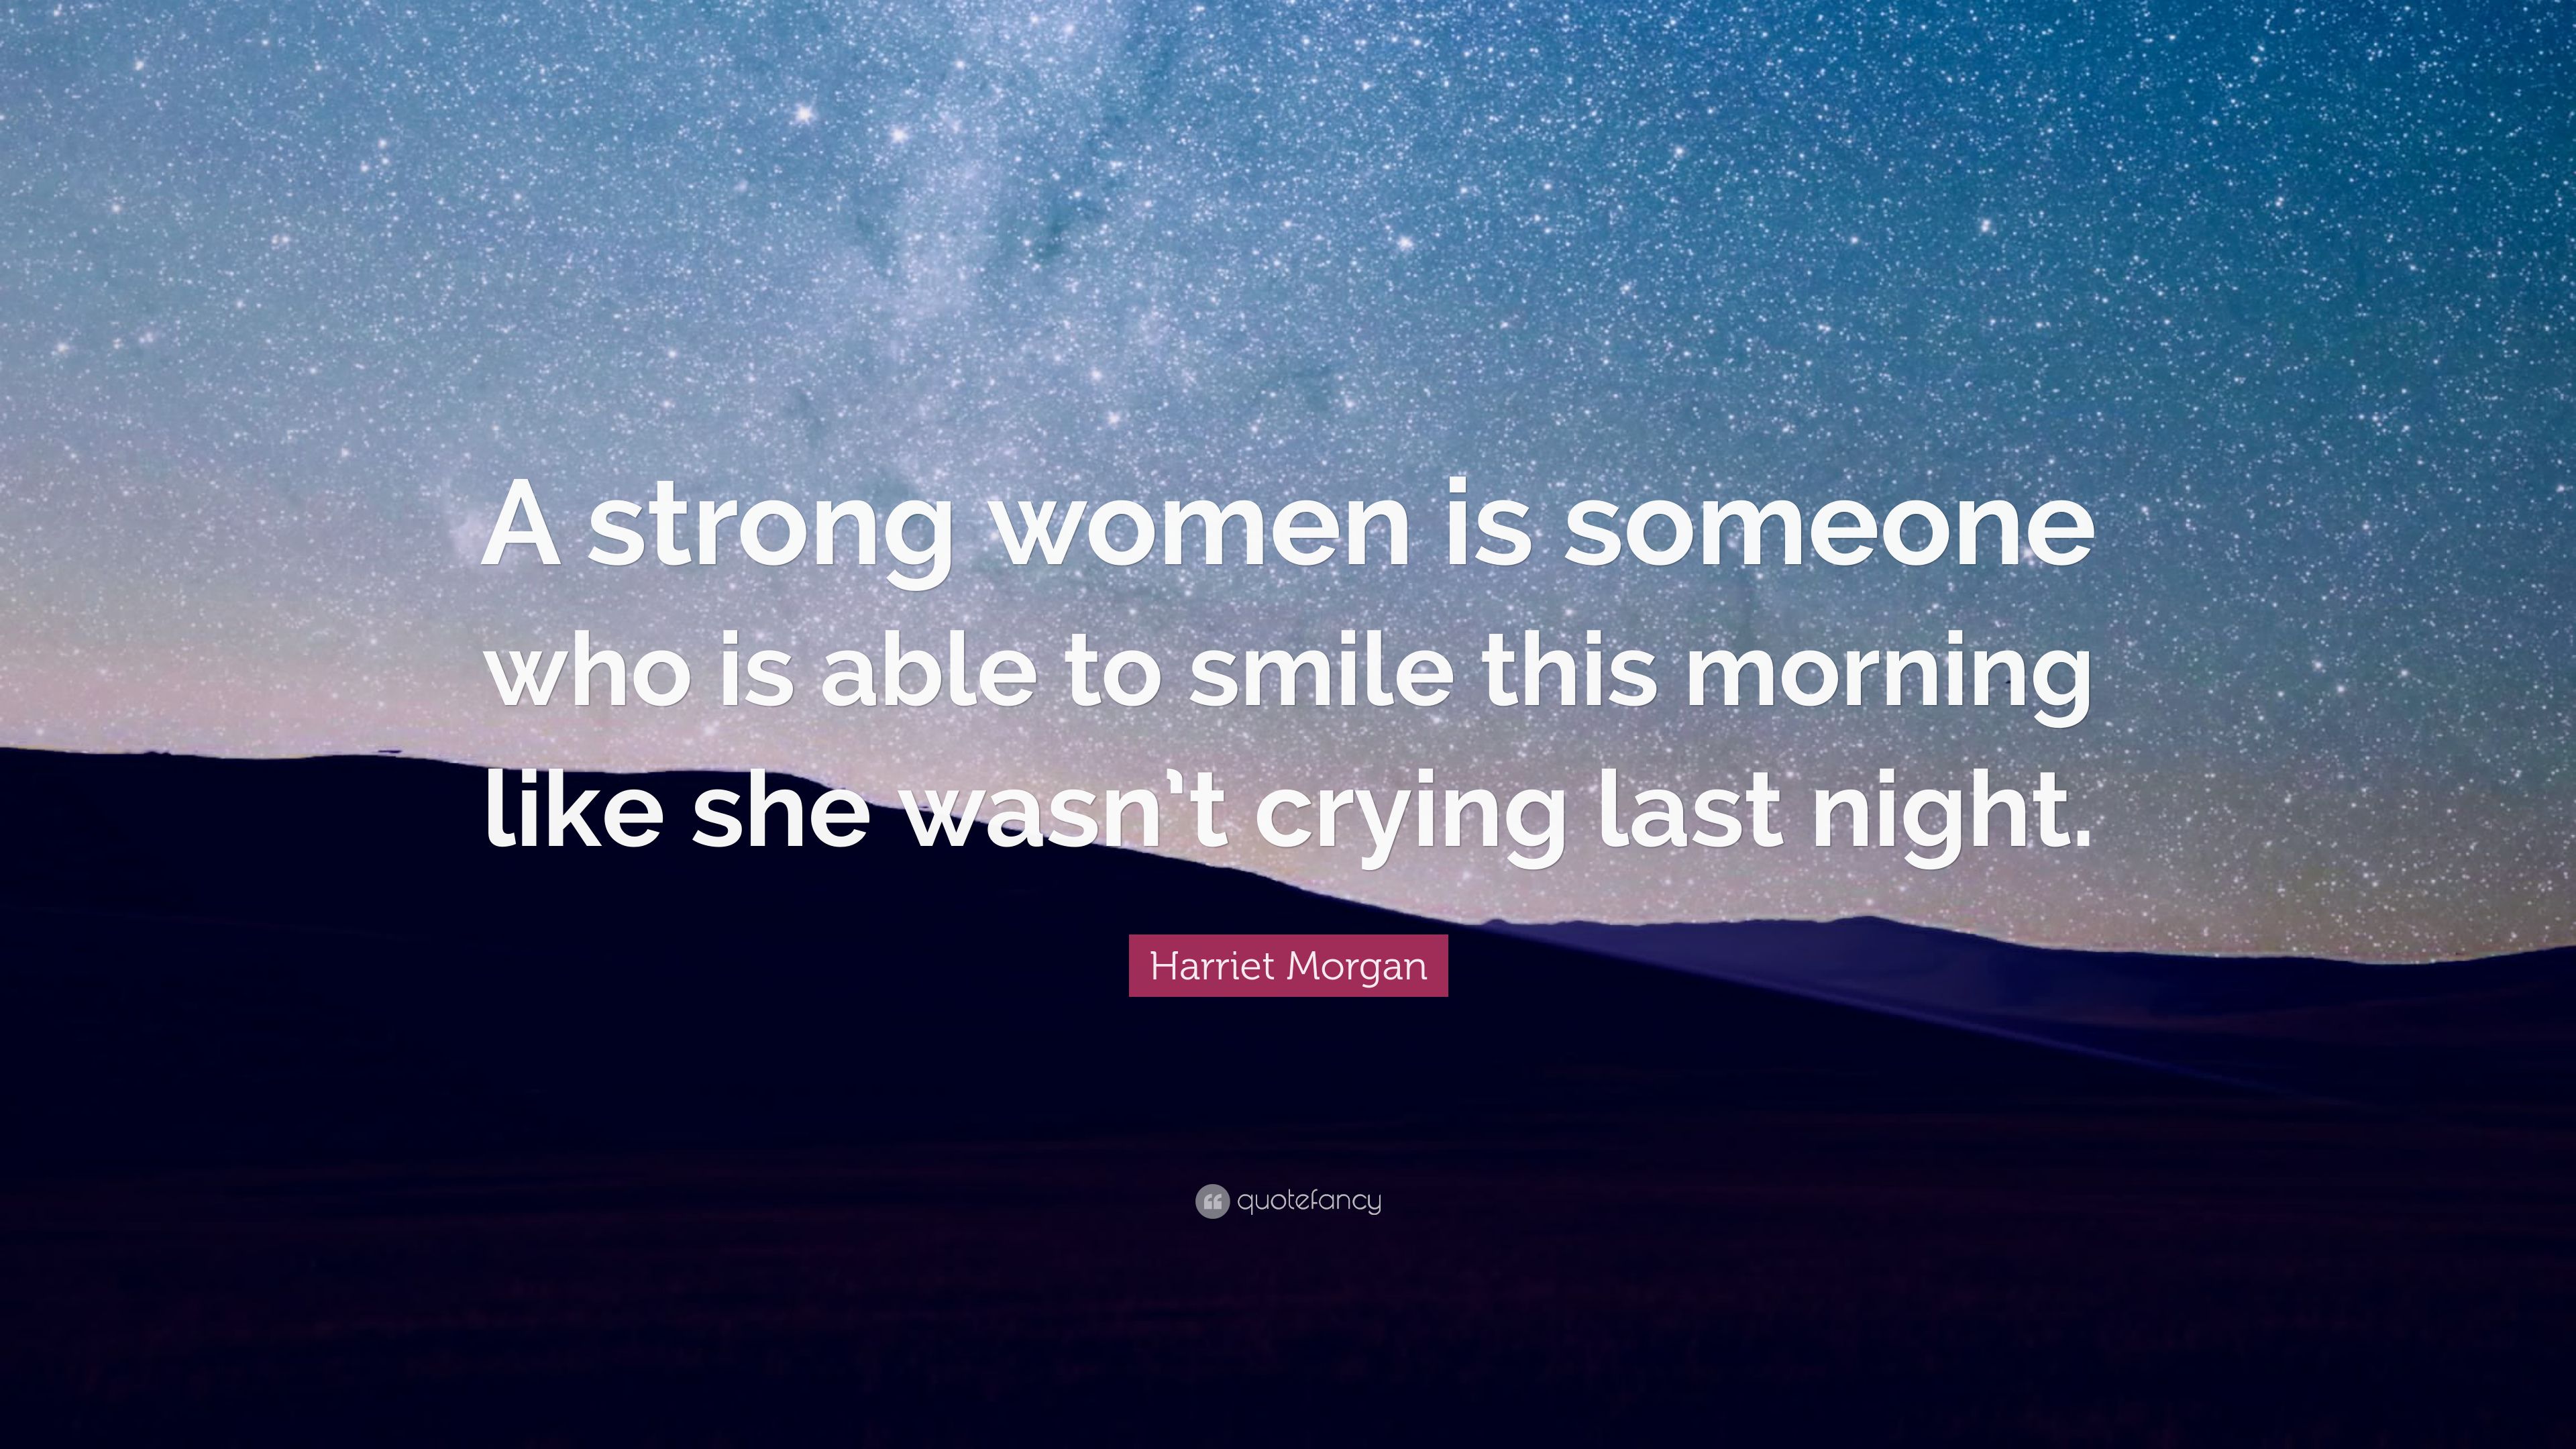 Harriet Morgan Quote: “A strong women is someone who is able to